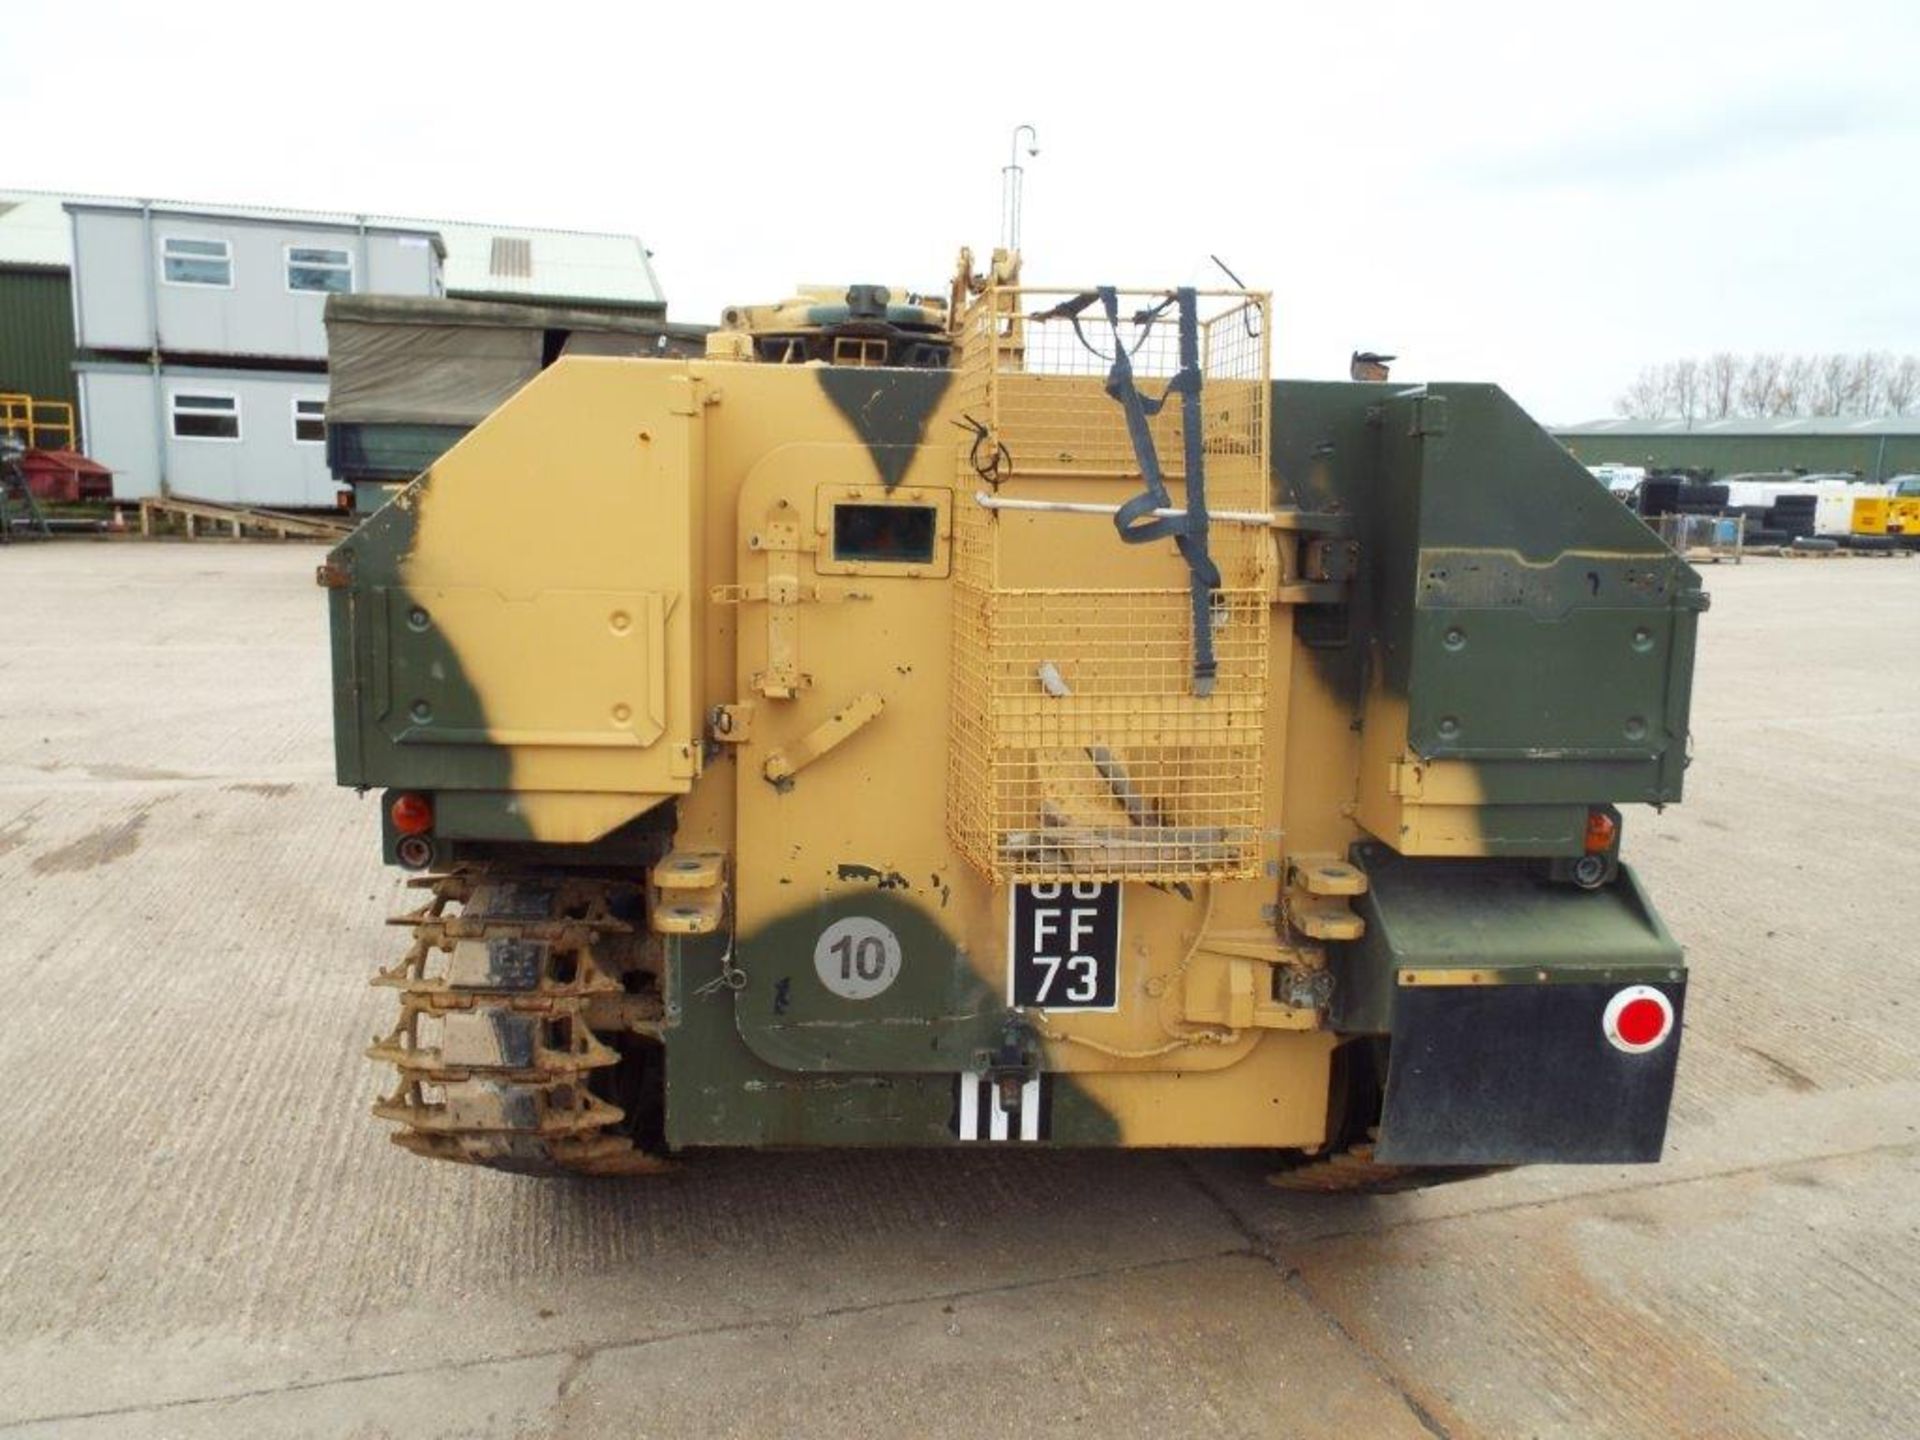 CVRT (Combat Vehicle Reconnaissance Tracked) Spartan Armoured Personnel Carrier - Image 6 of 29